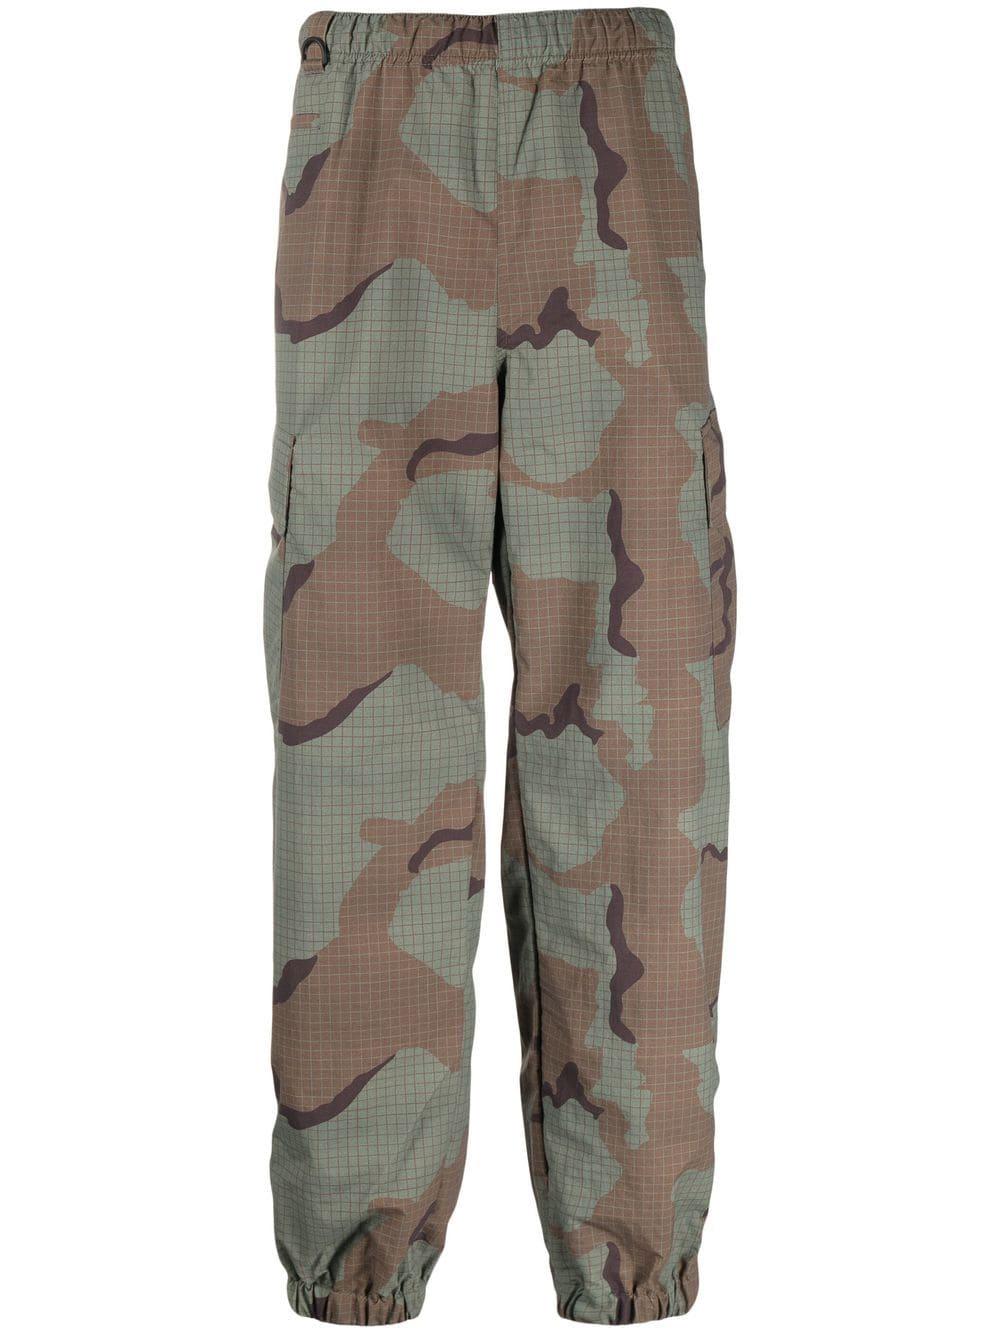 Lower jogger Style army print narrow fit pant – JaihindStore.in